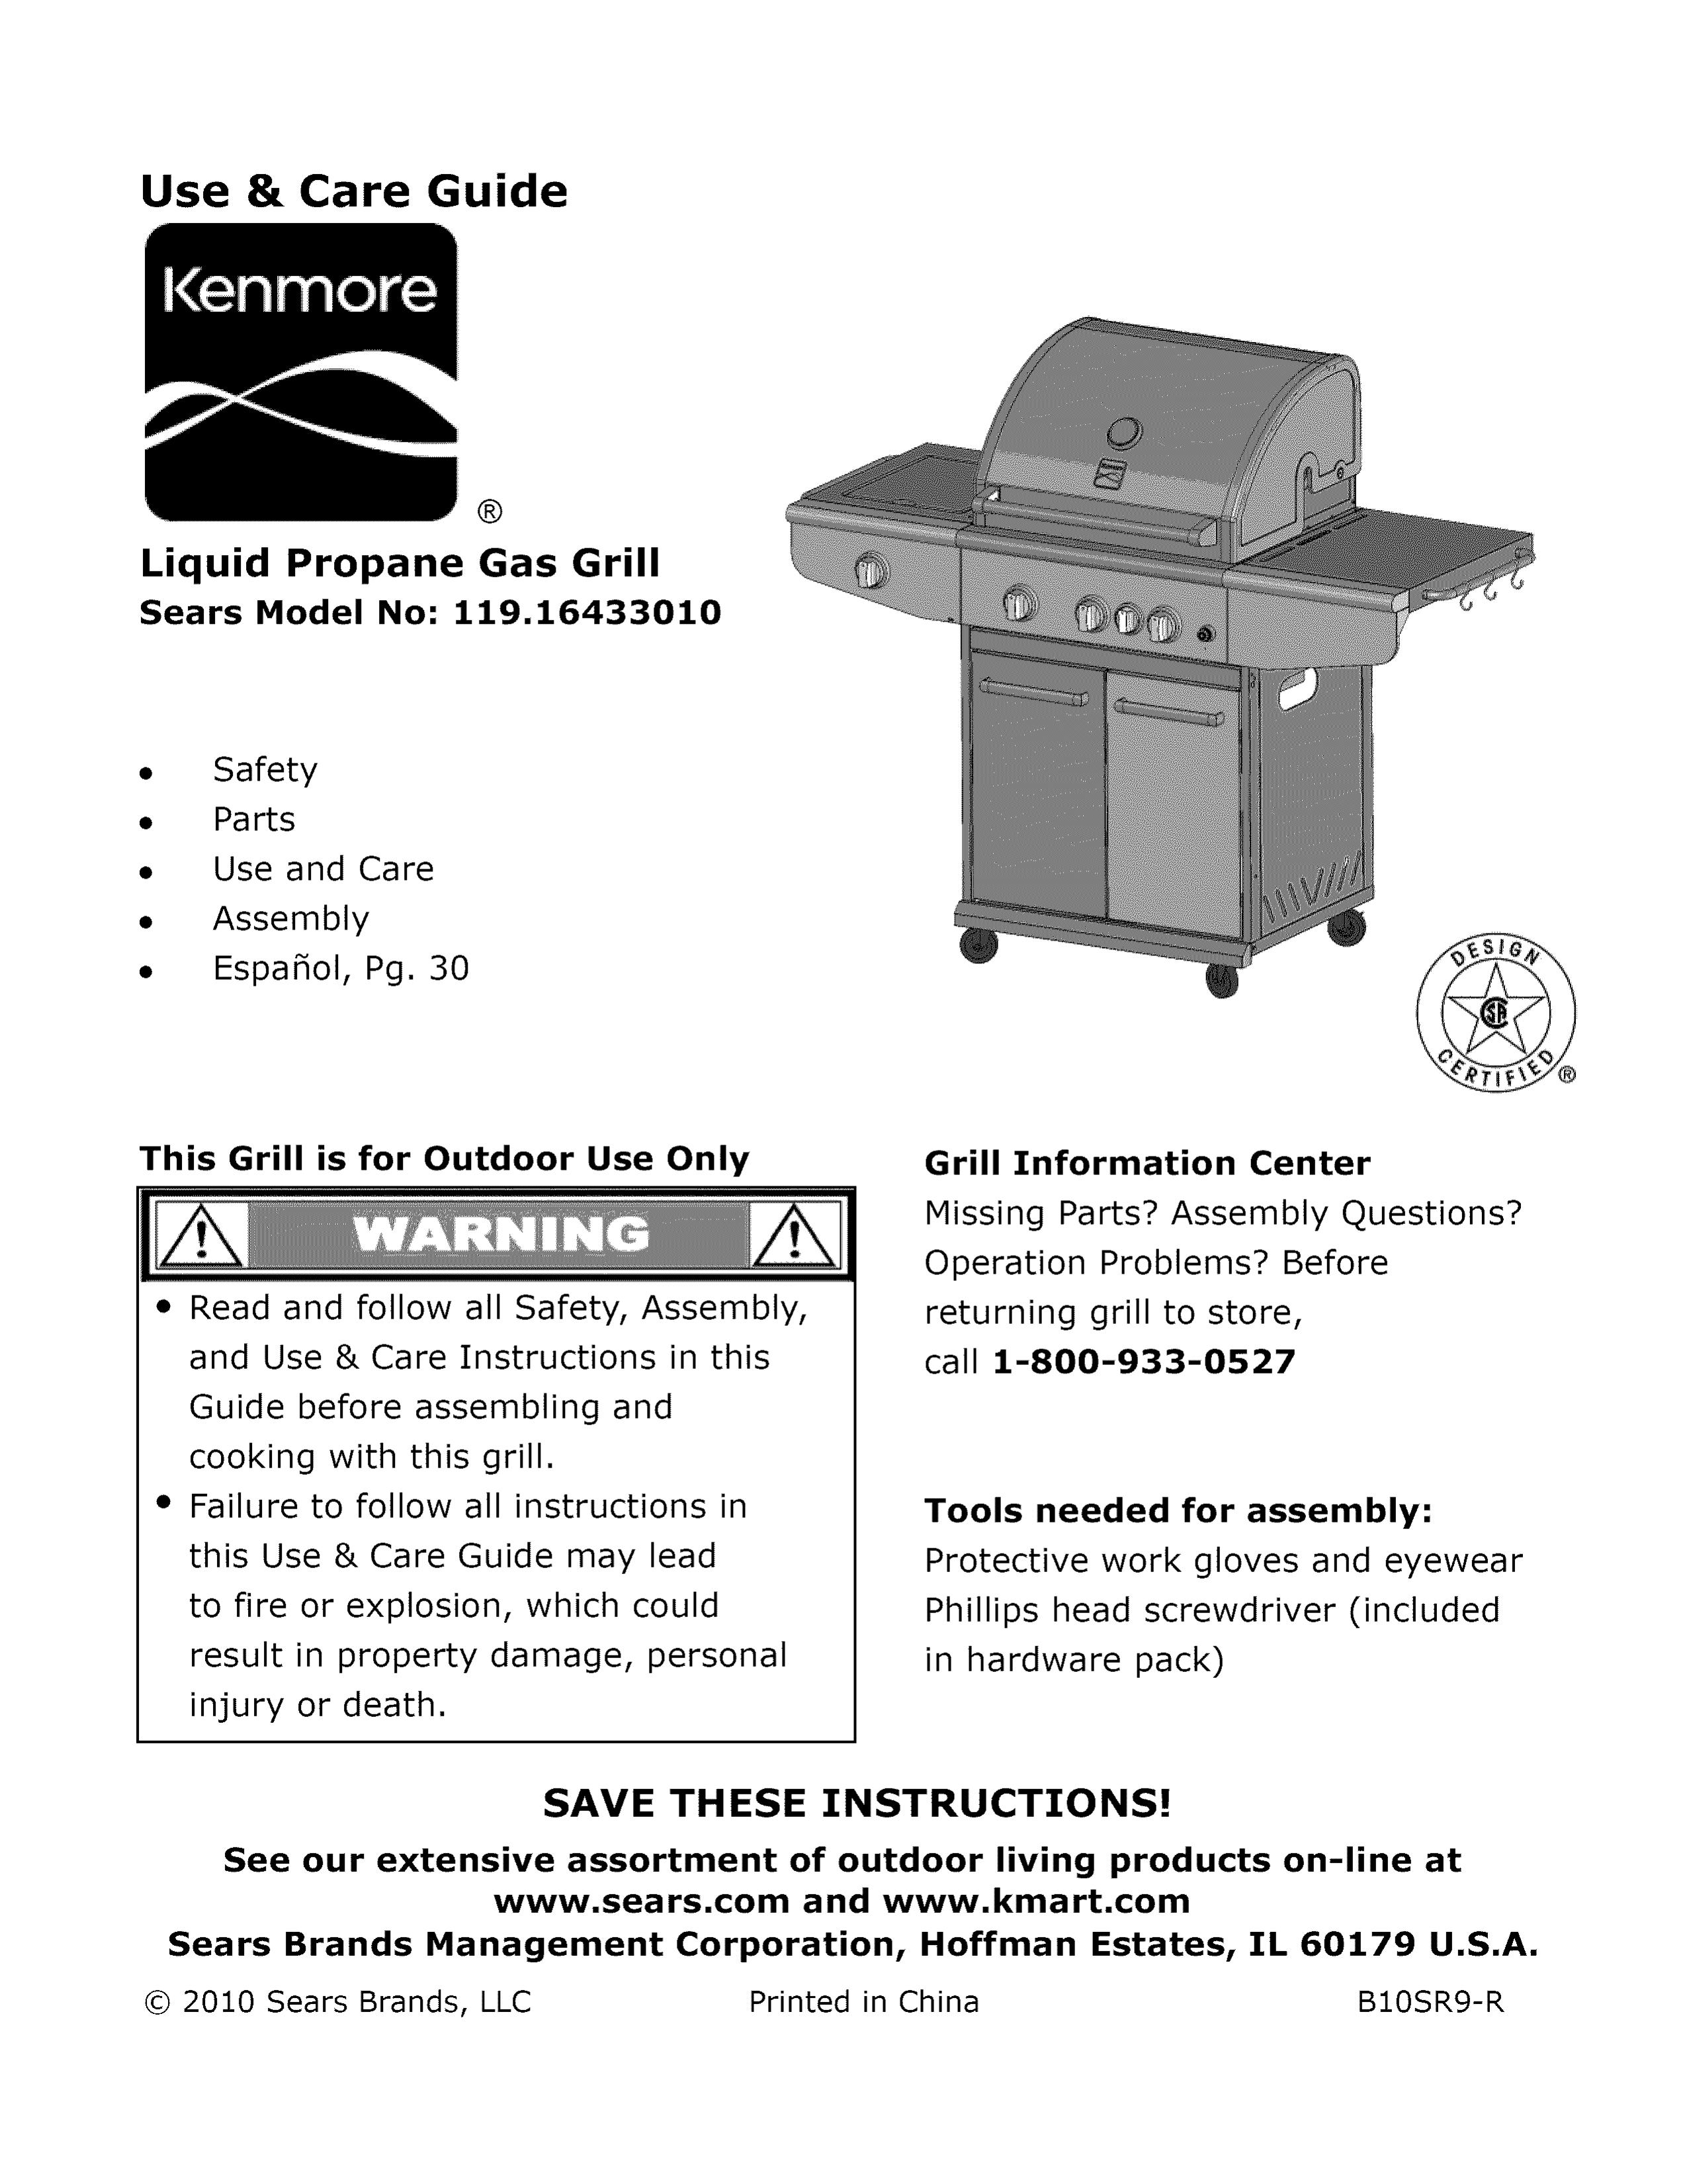 Kenmore 119.1643301 Gas Grill User Manual